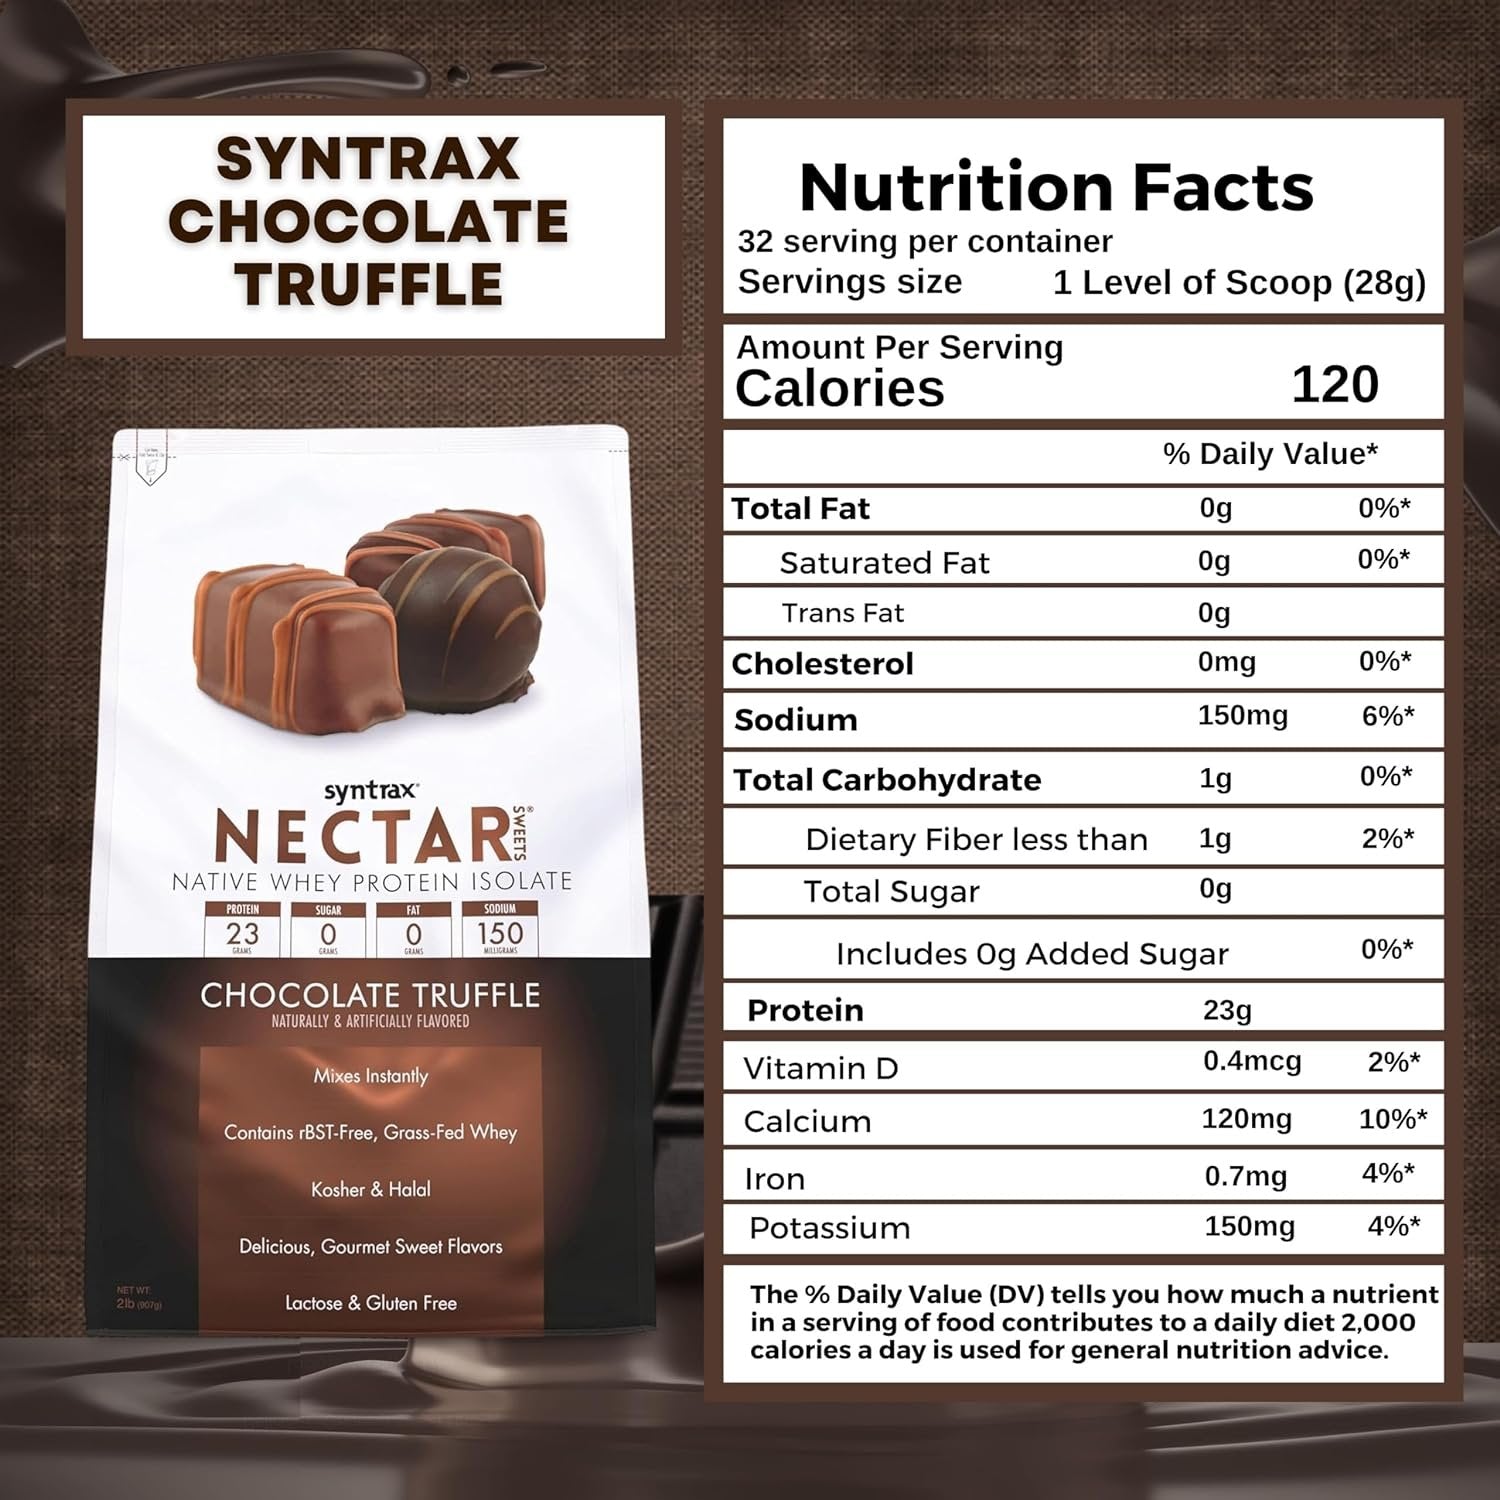 Syntrax Nectar Sweets - Native Whey Protein Isolate -  Kosher & Halal, Lactose & Gluten Free - Chocolate Truffle - 2 Pounds -  with Key Chain